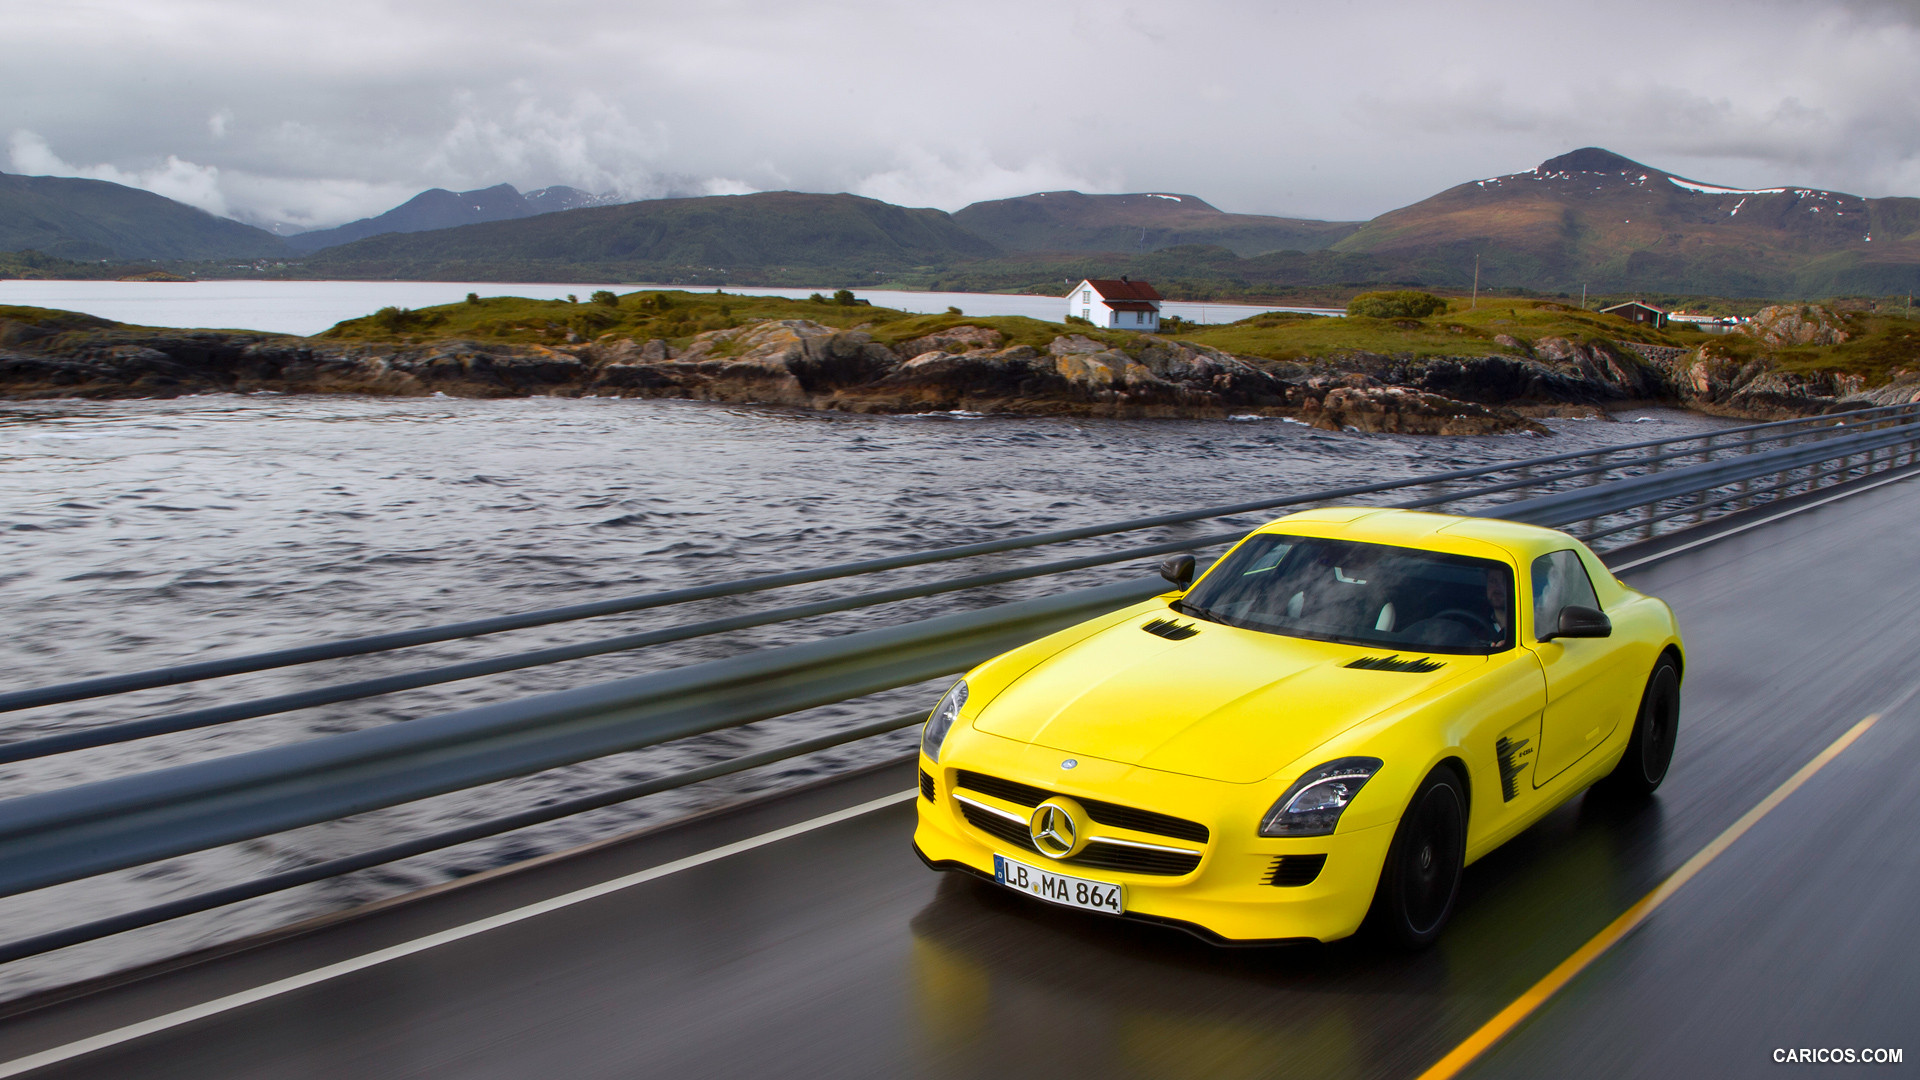 Mercedes-Benz SLS AMG E-CELL Concept  - Front, #7 of 60